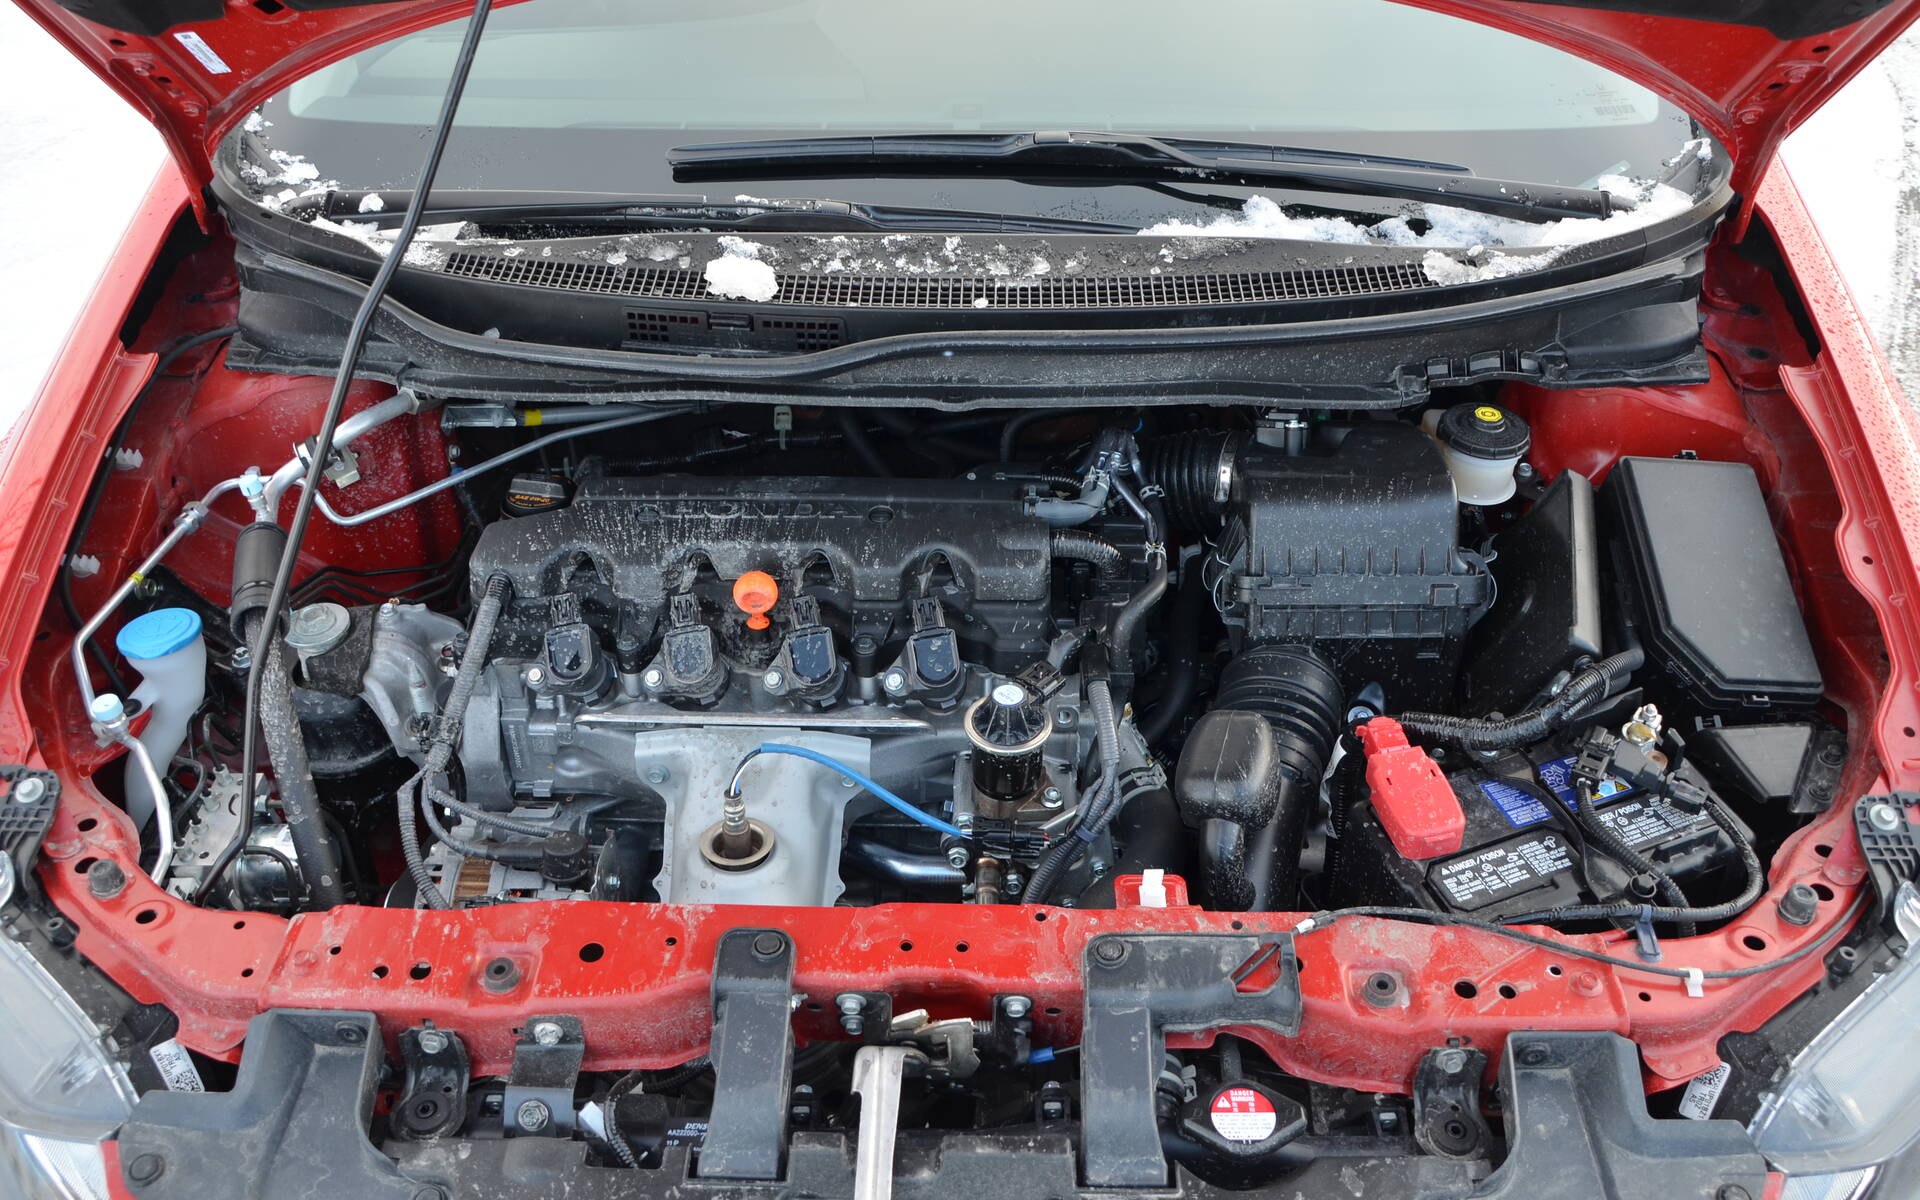 Why Won't Your Engine Start? - The Car Guide